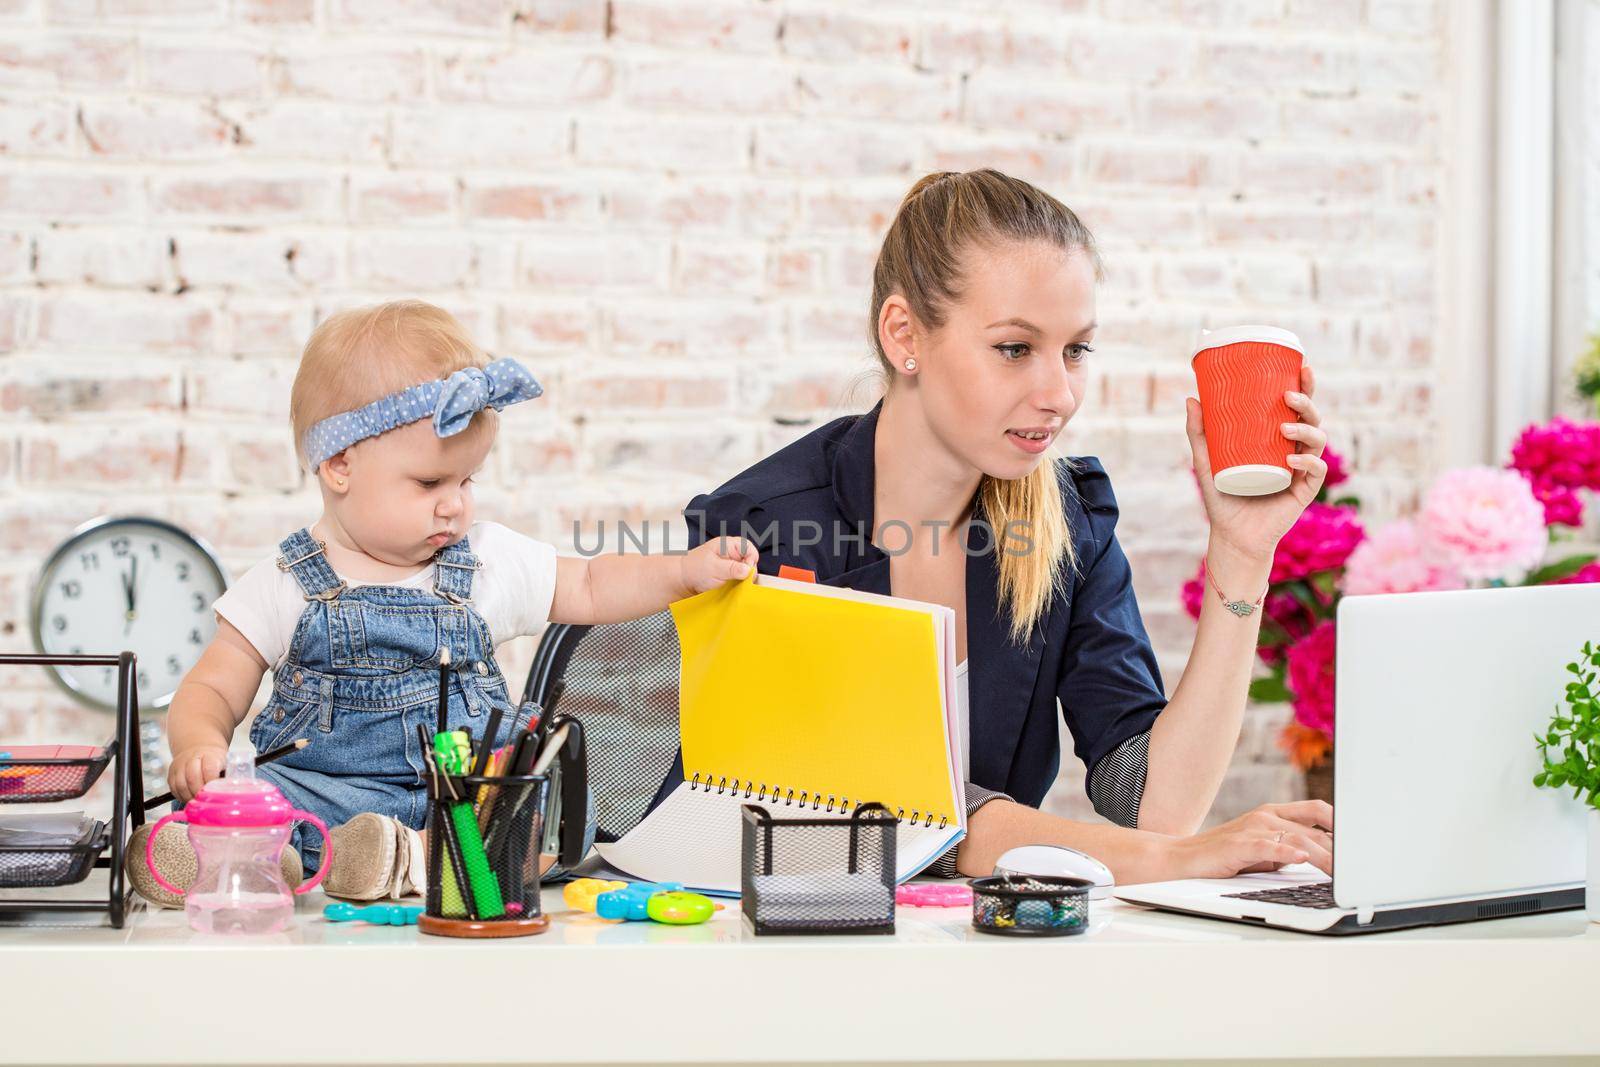 Businesswoman mother woman with a daughter working at the laptop. At the workplace, together with a small child